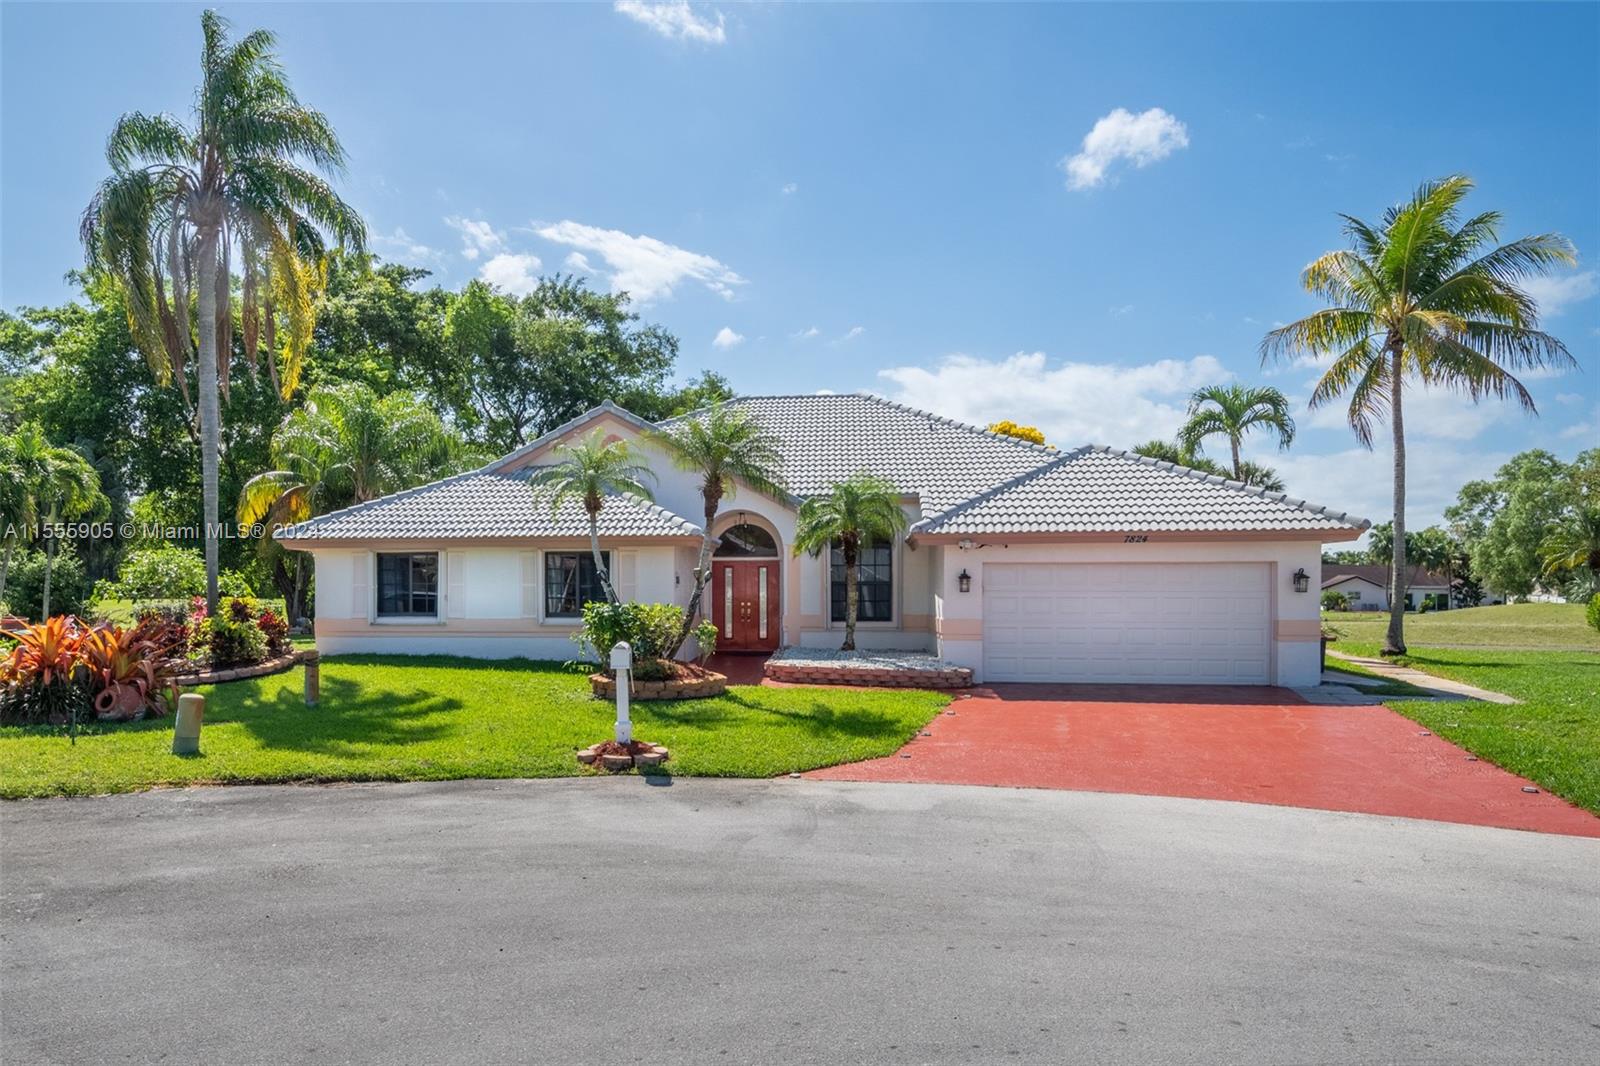 Property for Sale at 7824 Nw 83rd St, Tamarac, Broward County, Florida - Bedrooms: 3 
Bathrooms: 3  - $810,000